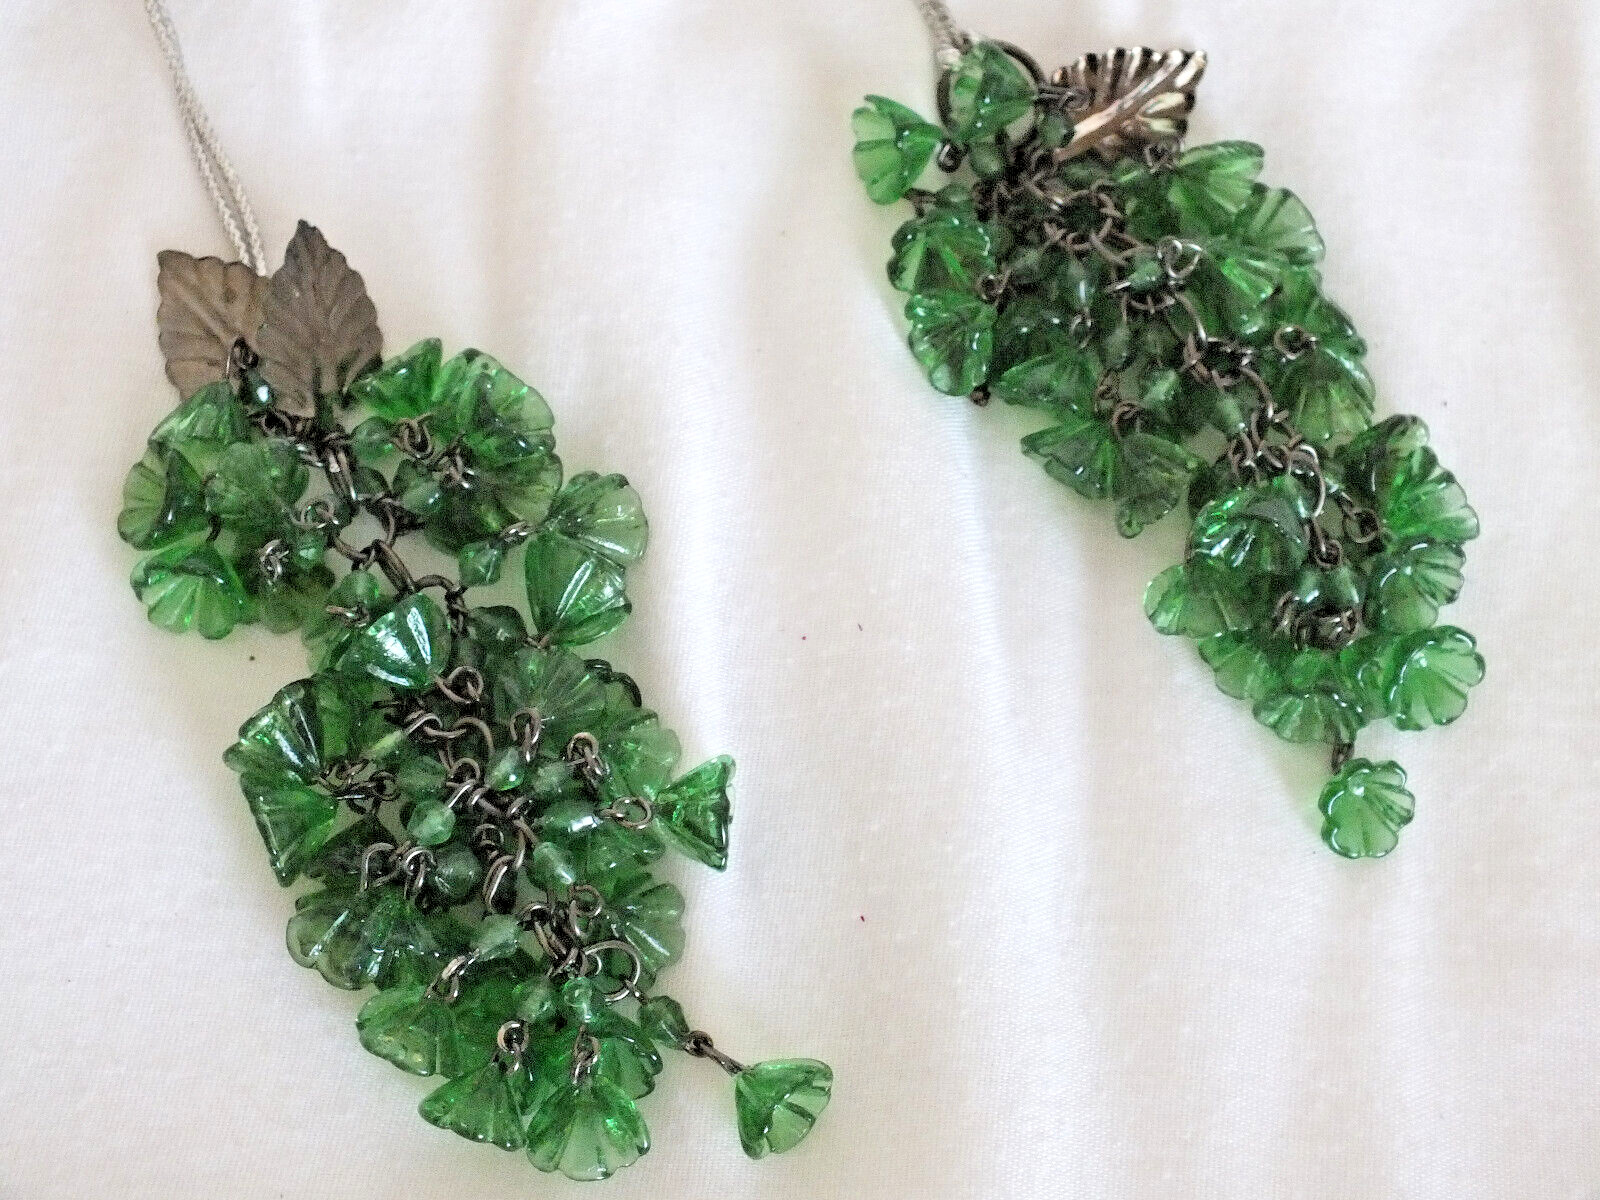 Approximately 80 tiny green glass flowers hanging like wisteria w/4 metal leaves